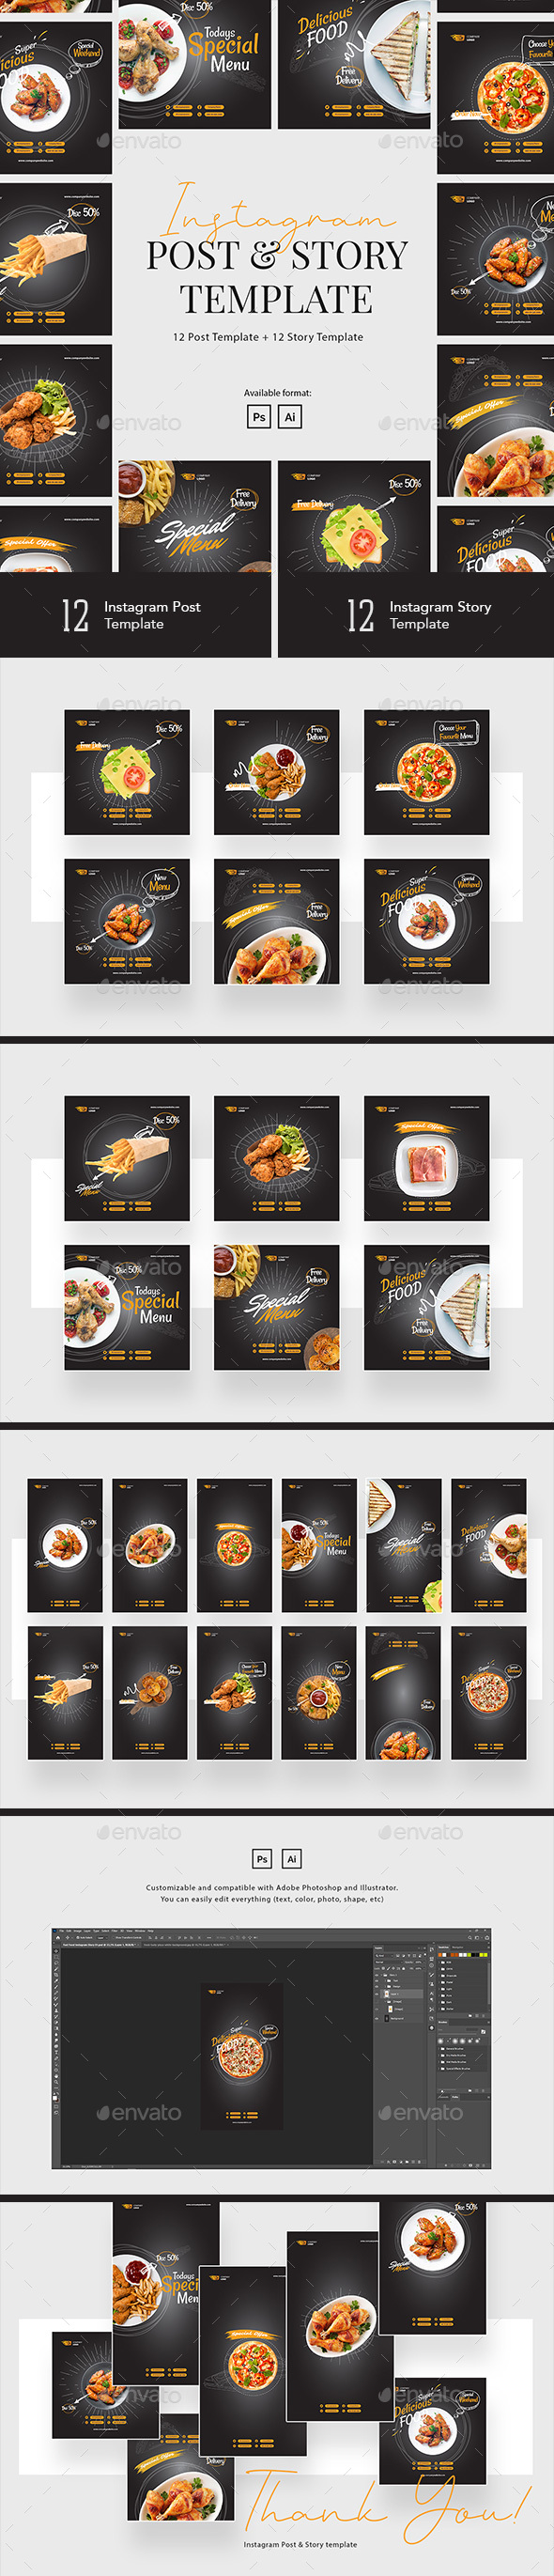 Fast Food Instagram Post and Story Template